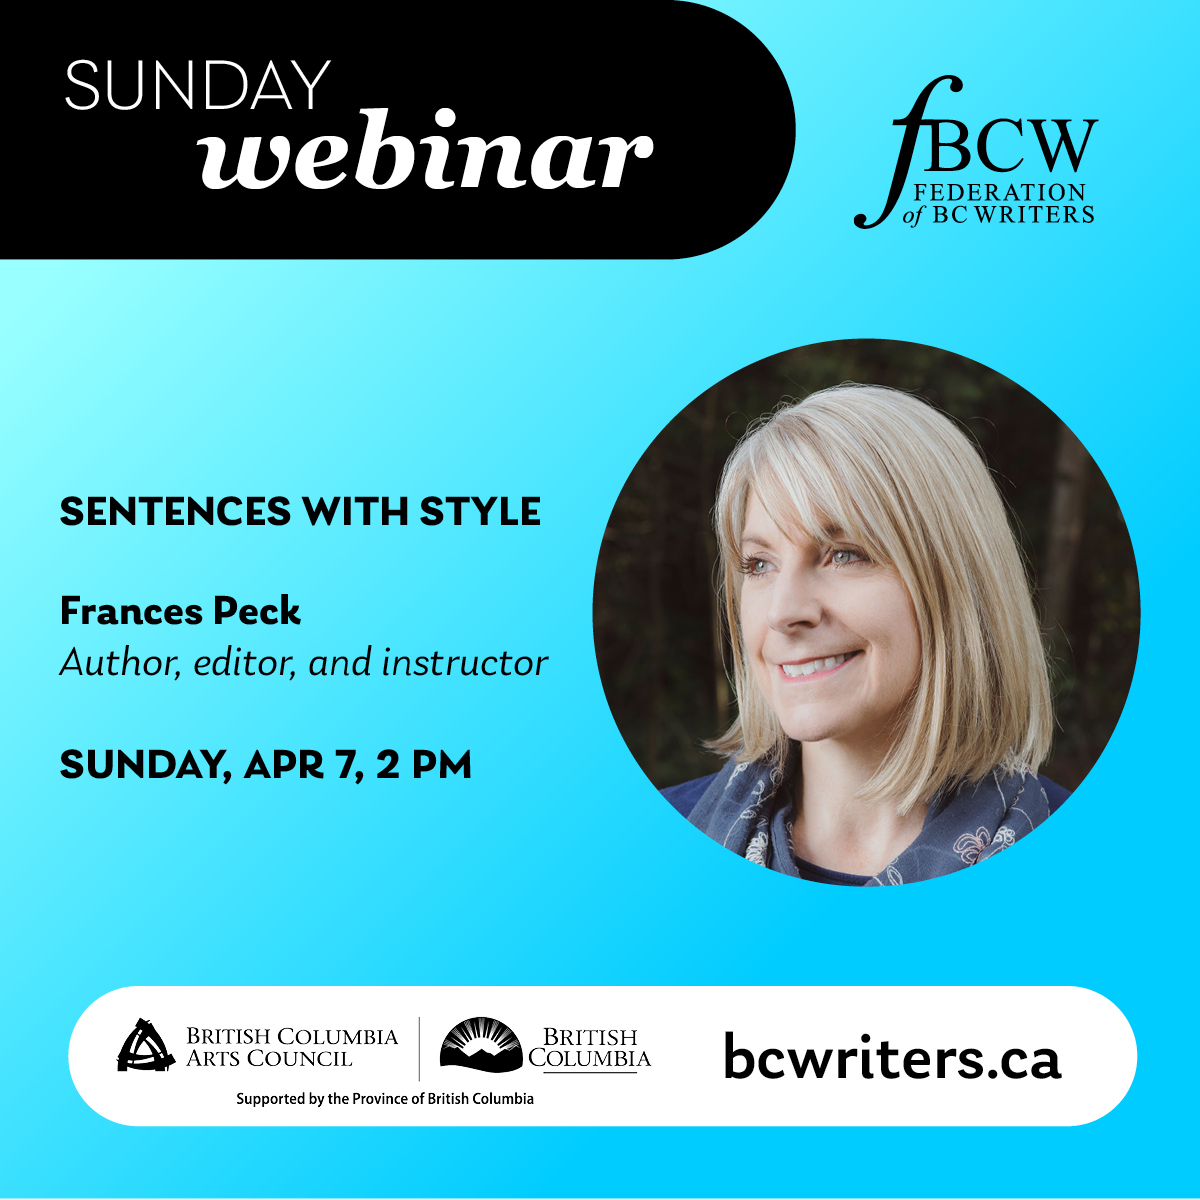 Join us as Frances Peck dusts off some intriguing sentence-level techniques that can punch up your writing. Sentences with Style is on Sunday, April 7, at 2:00 pm PST. @FrancesLPeck Register on our website: bcwriters.ca/event-5662524